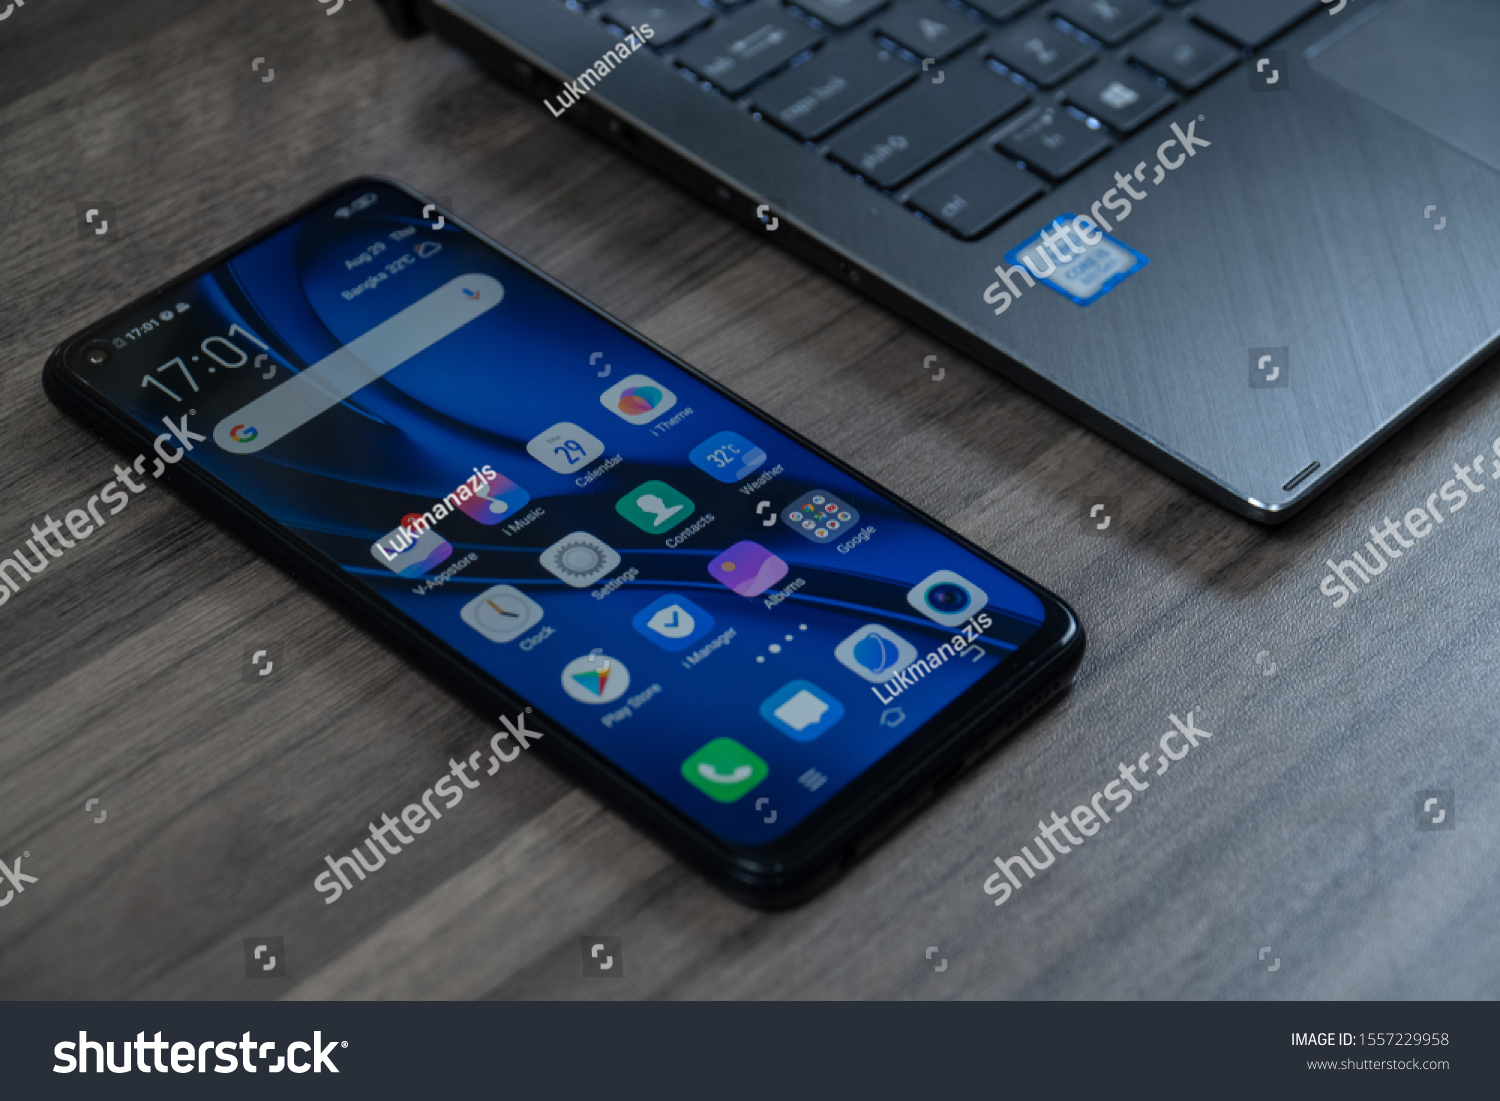 Jakarta, Indonesia - November 12, 2019: The Vivo Z1 Pro Android smartphone is built around a 6.53" FHD+ display. #1557229958